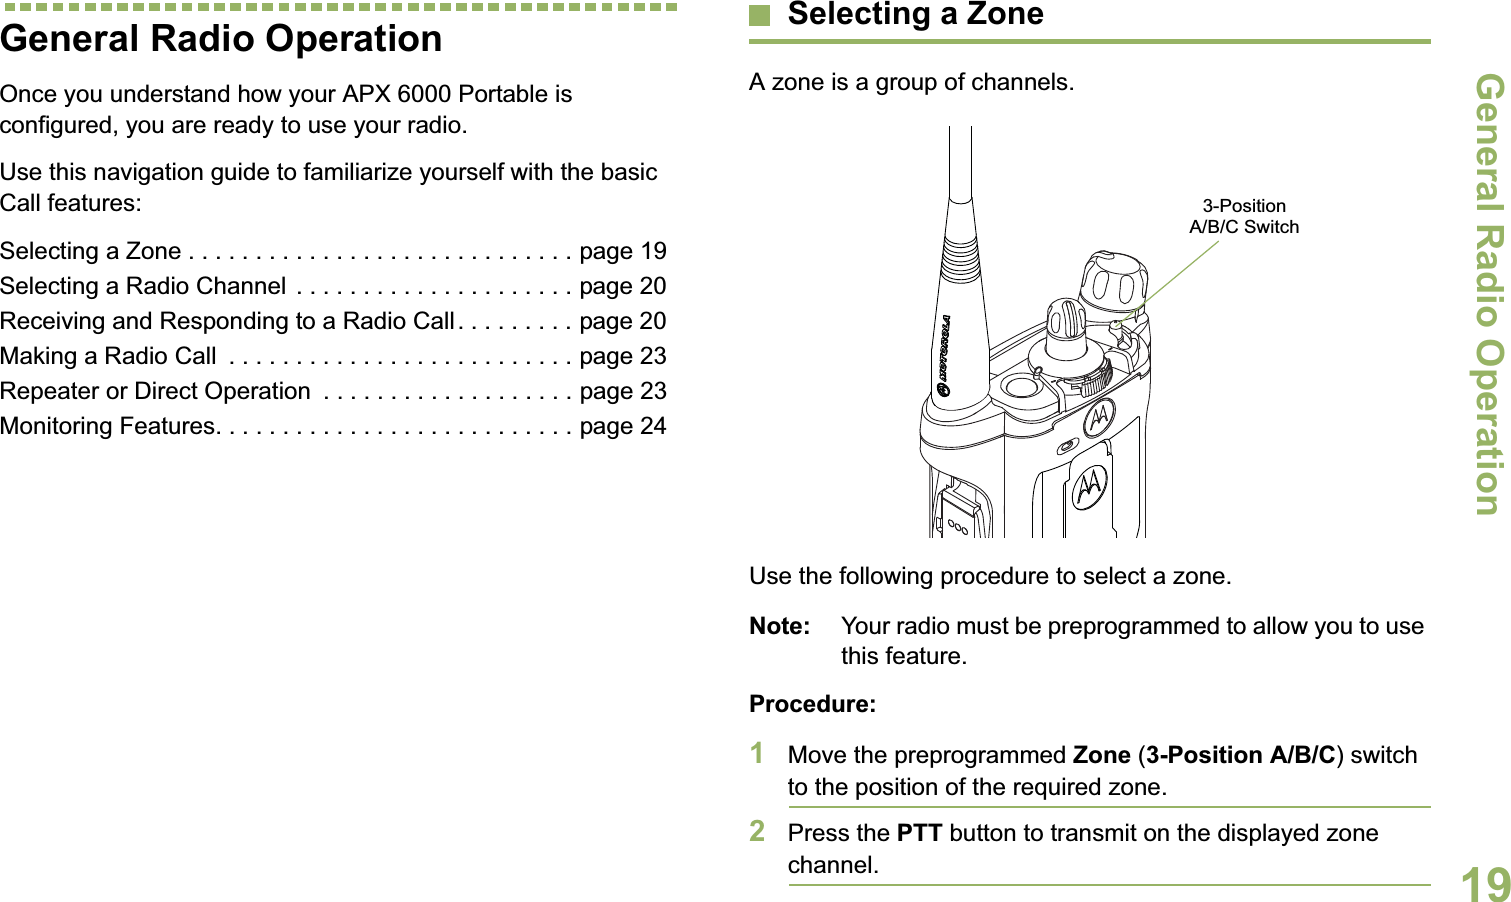 General Radio OperationEnglish19General Radio OperationOnce you understand how your APX 6000 Portable is configured, you are ready to use your radio.Use this navigation guide to familiarize yourself with the basic Call features:Selecting a Zone . . . . . . . . . . . . . . . . . . . . . . . . . . . . . page 19Selecting a Radio Channel  . . . . . . . . . . . . . . . . . . . . . page 20Receiving and Responding to a Radio Call. . . . . . . . . page 20Making a Radio Call  . . . . . . . . . . . . . . . . . . . . . . . . . . page 23Repeater or Direct Operation  . . . . . . . . . . . . . . . . . . . page 23Monitoring Features. . . . . . . . . . . . . . . . . . . . . . . . . . . page 24Selecting a ZoneA zone is a group of channels.Use the following procedure to select a zone.Note: Your radio must be preprogrammed to allow you to use this feature.Procedure:1Move the preprogrammed Zone (3-Position A/B/C) switch to the position of the required zone.2Press the PTT button to transmit on the displayed zone channel.3-Position A/B/C Switch